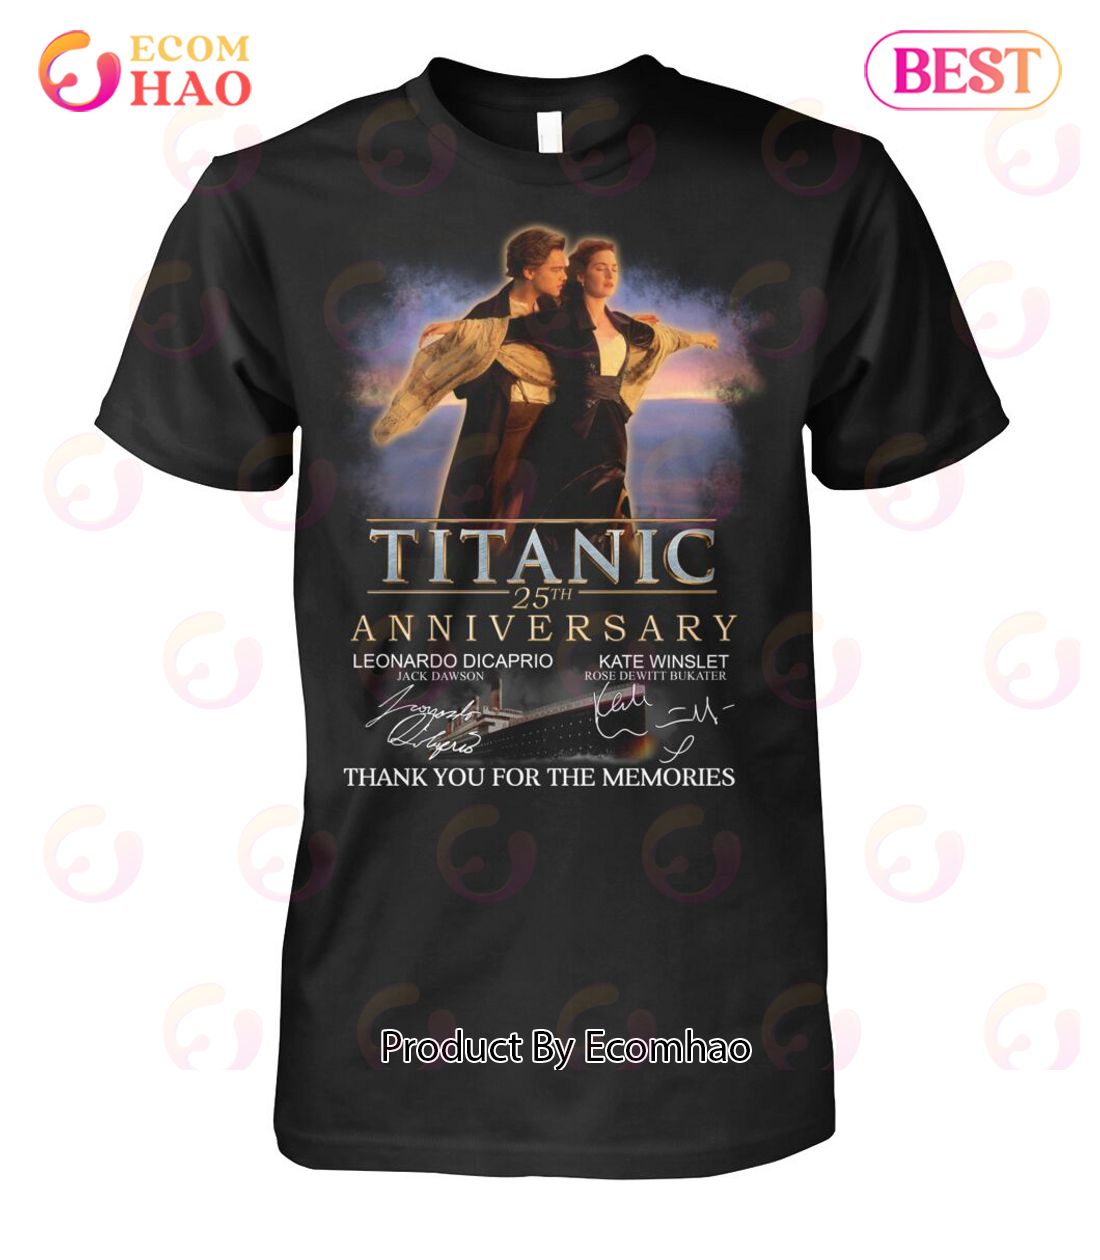 Titanic 25th Anniversary Thank You For The Memories T-Shirt